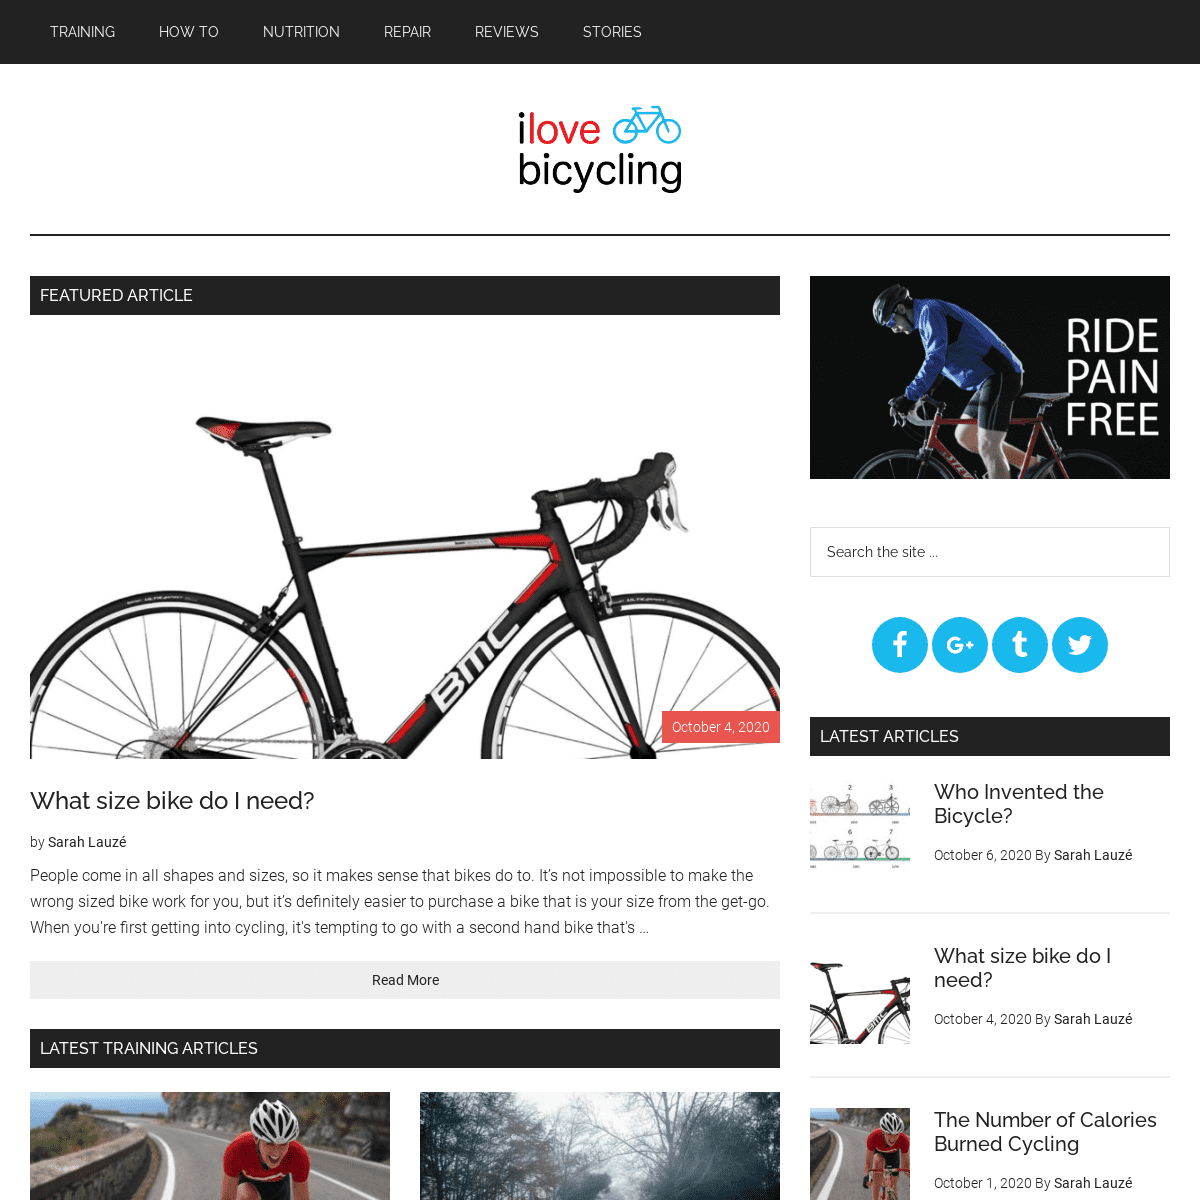 A complete backup of https://ilovebicycling.com